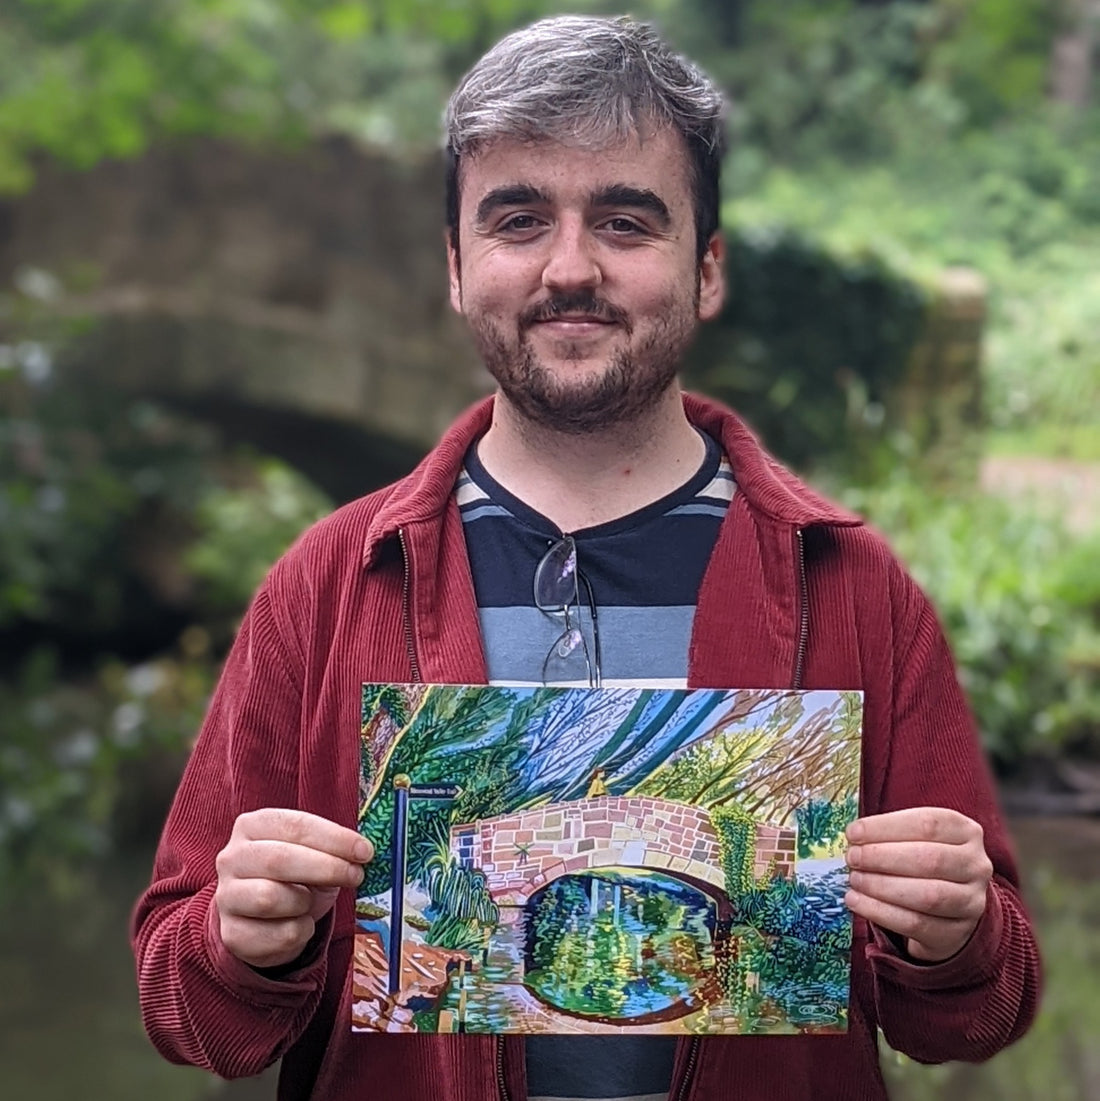 Zac Rossiter. At Meanwood park exploring his illustration style and creative influences